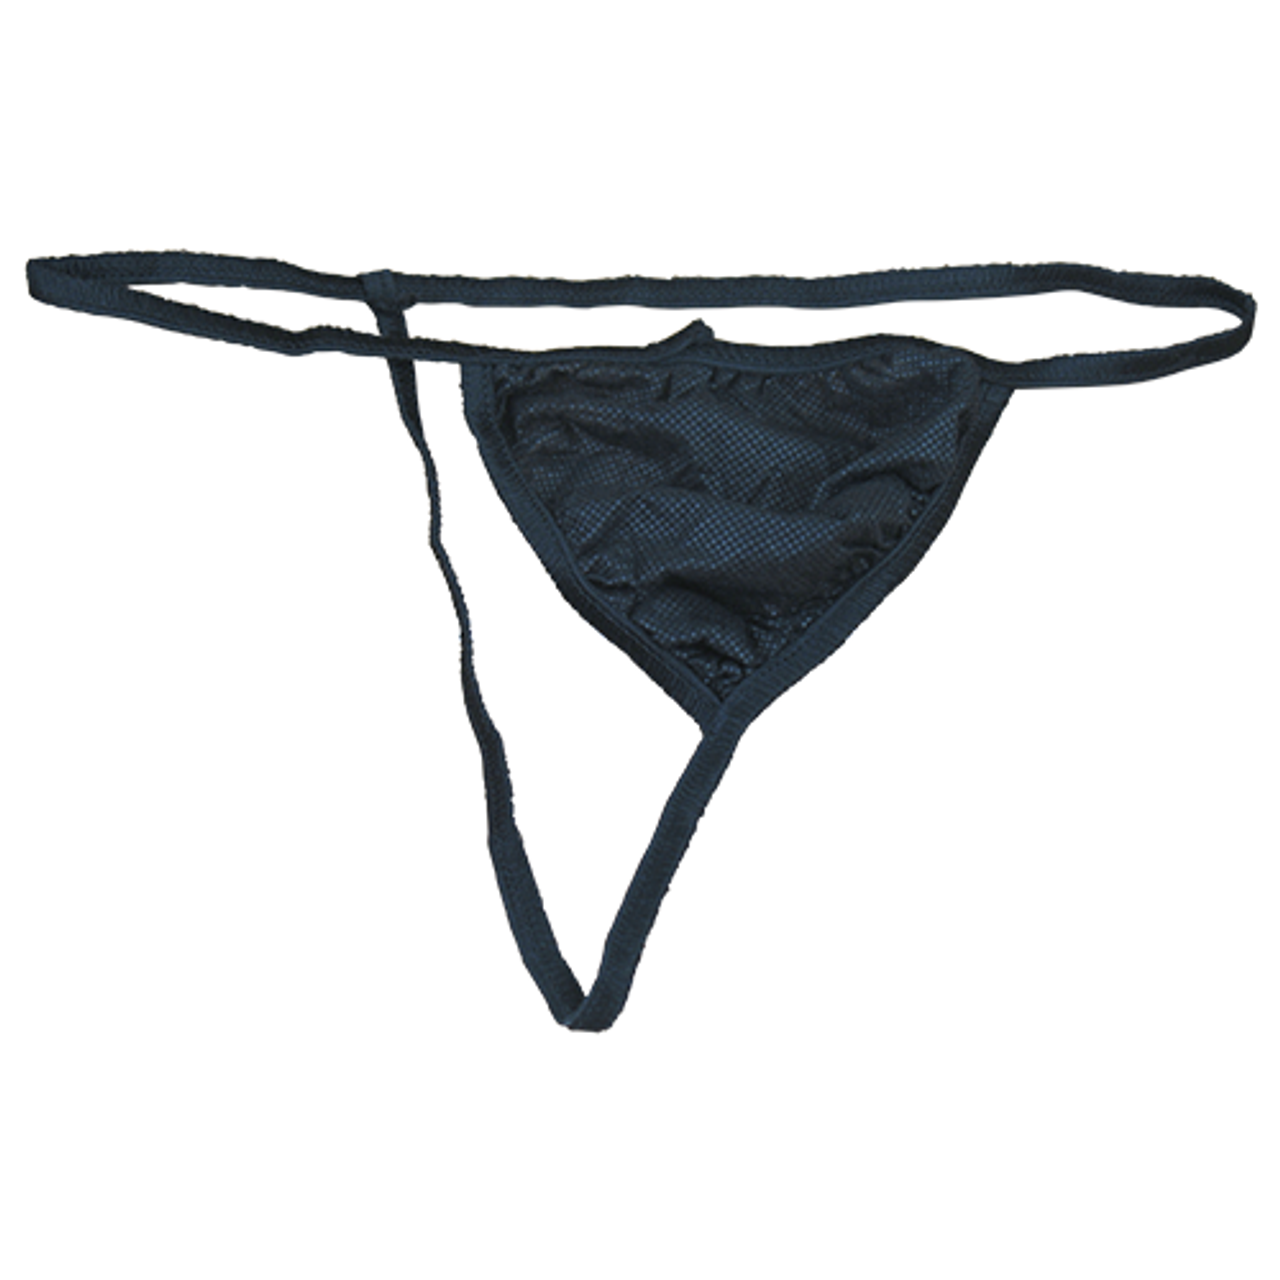 Disposable Ladies Panties 25 piece- Special Offer